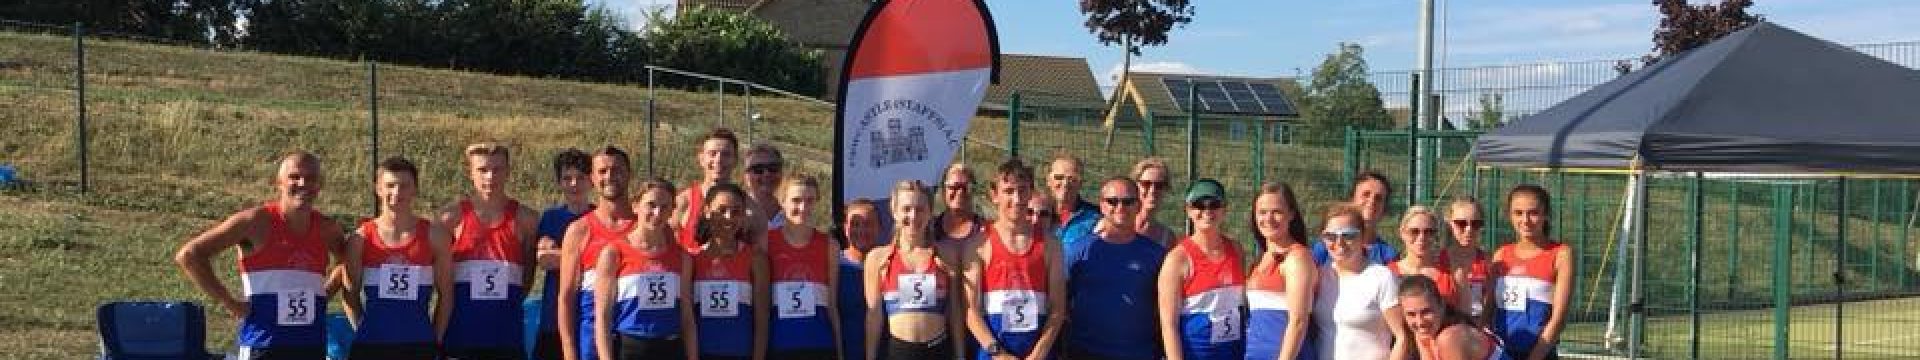 North Staffs Cross Country League at Winsford – 30/9/2017